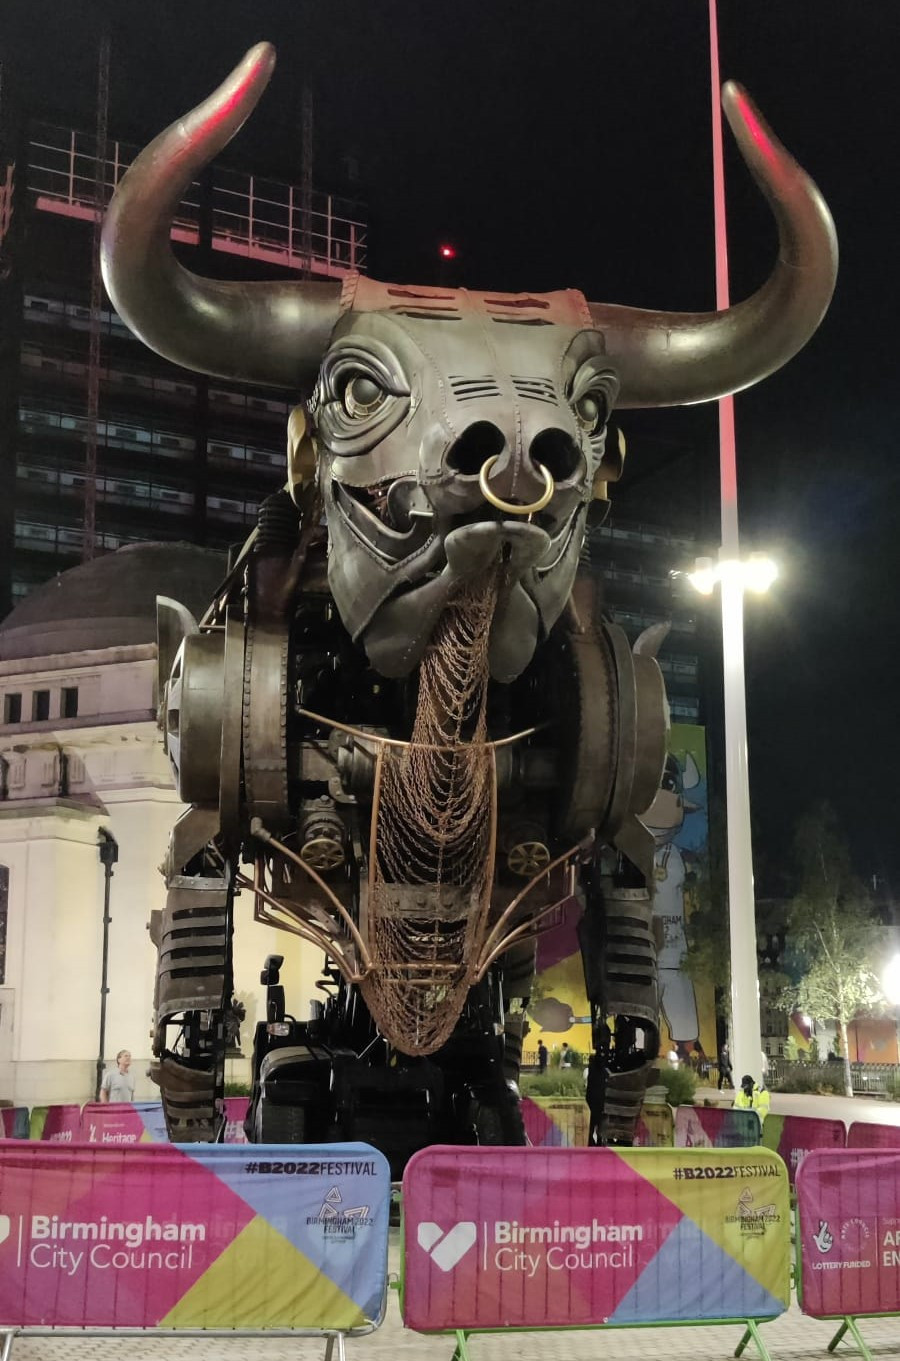 A campaign to save the bull that was the star of the Birmingham 2022 Opening Ceremony has been launched ©ITG